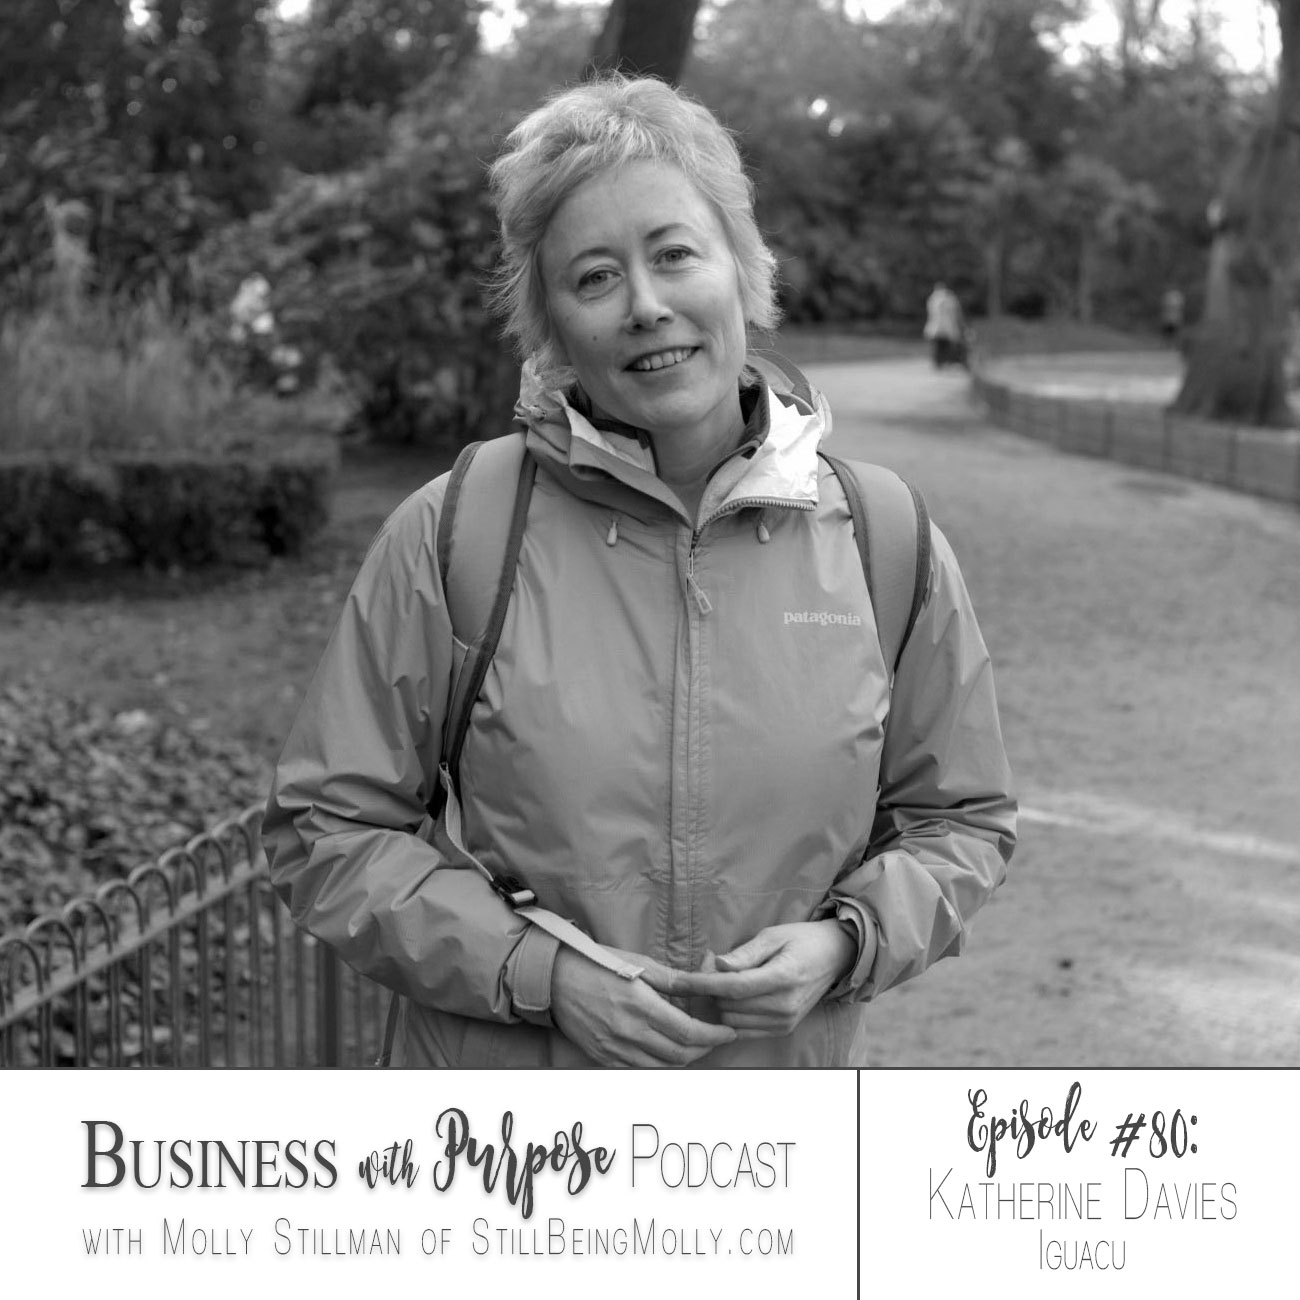 Business with Purpose Podcast EP 80: Katherine Davies, Founder and CEO of Iguacu by popular North Carolina ethical blogger and podcaster Still Being Molly